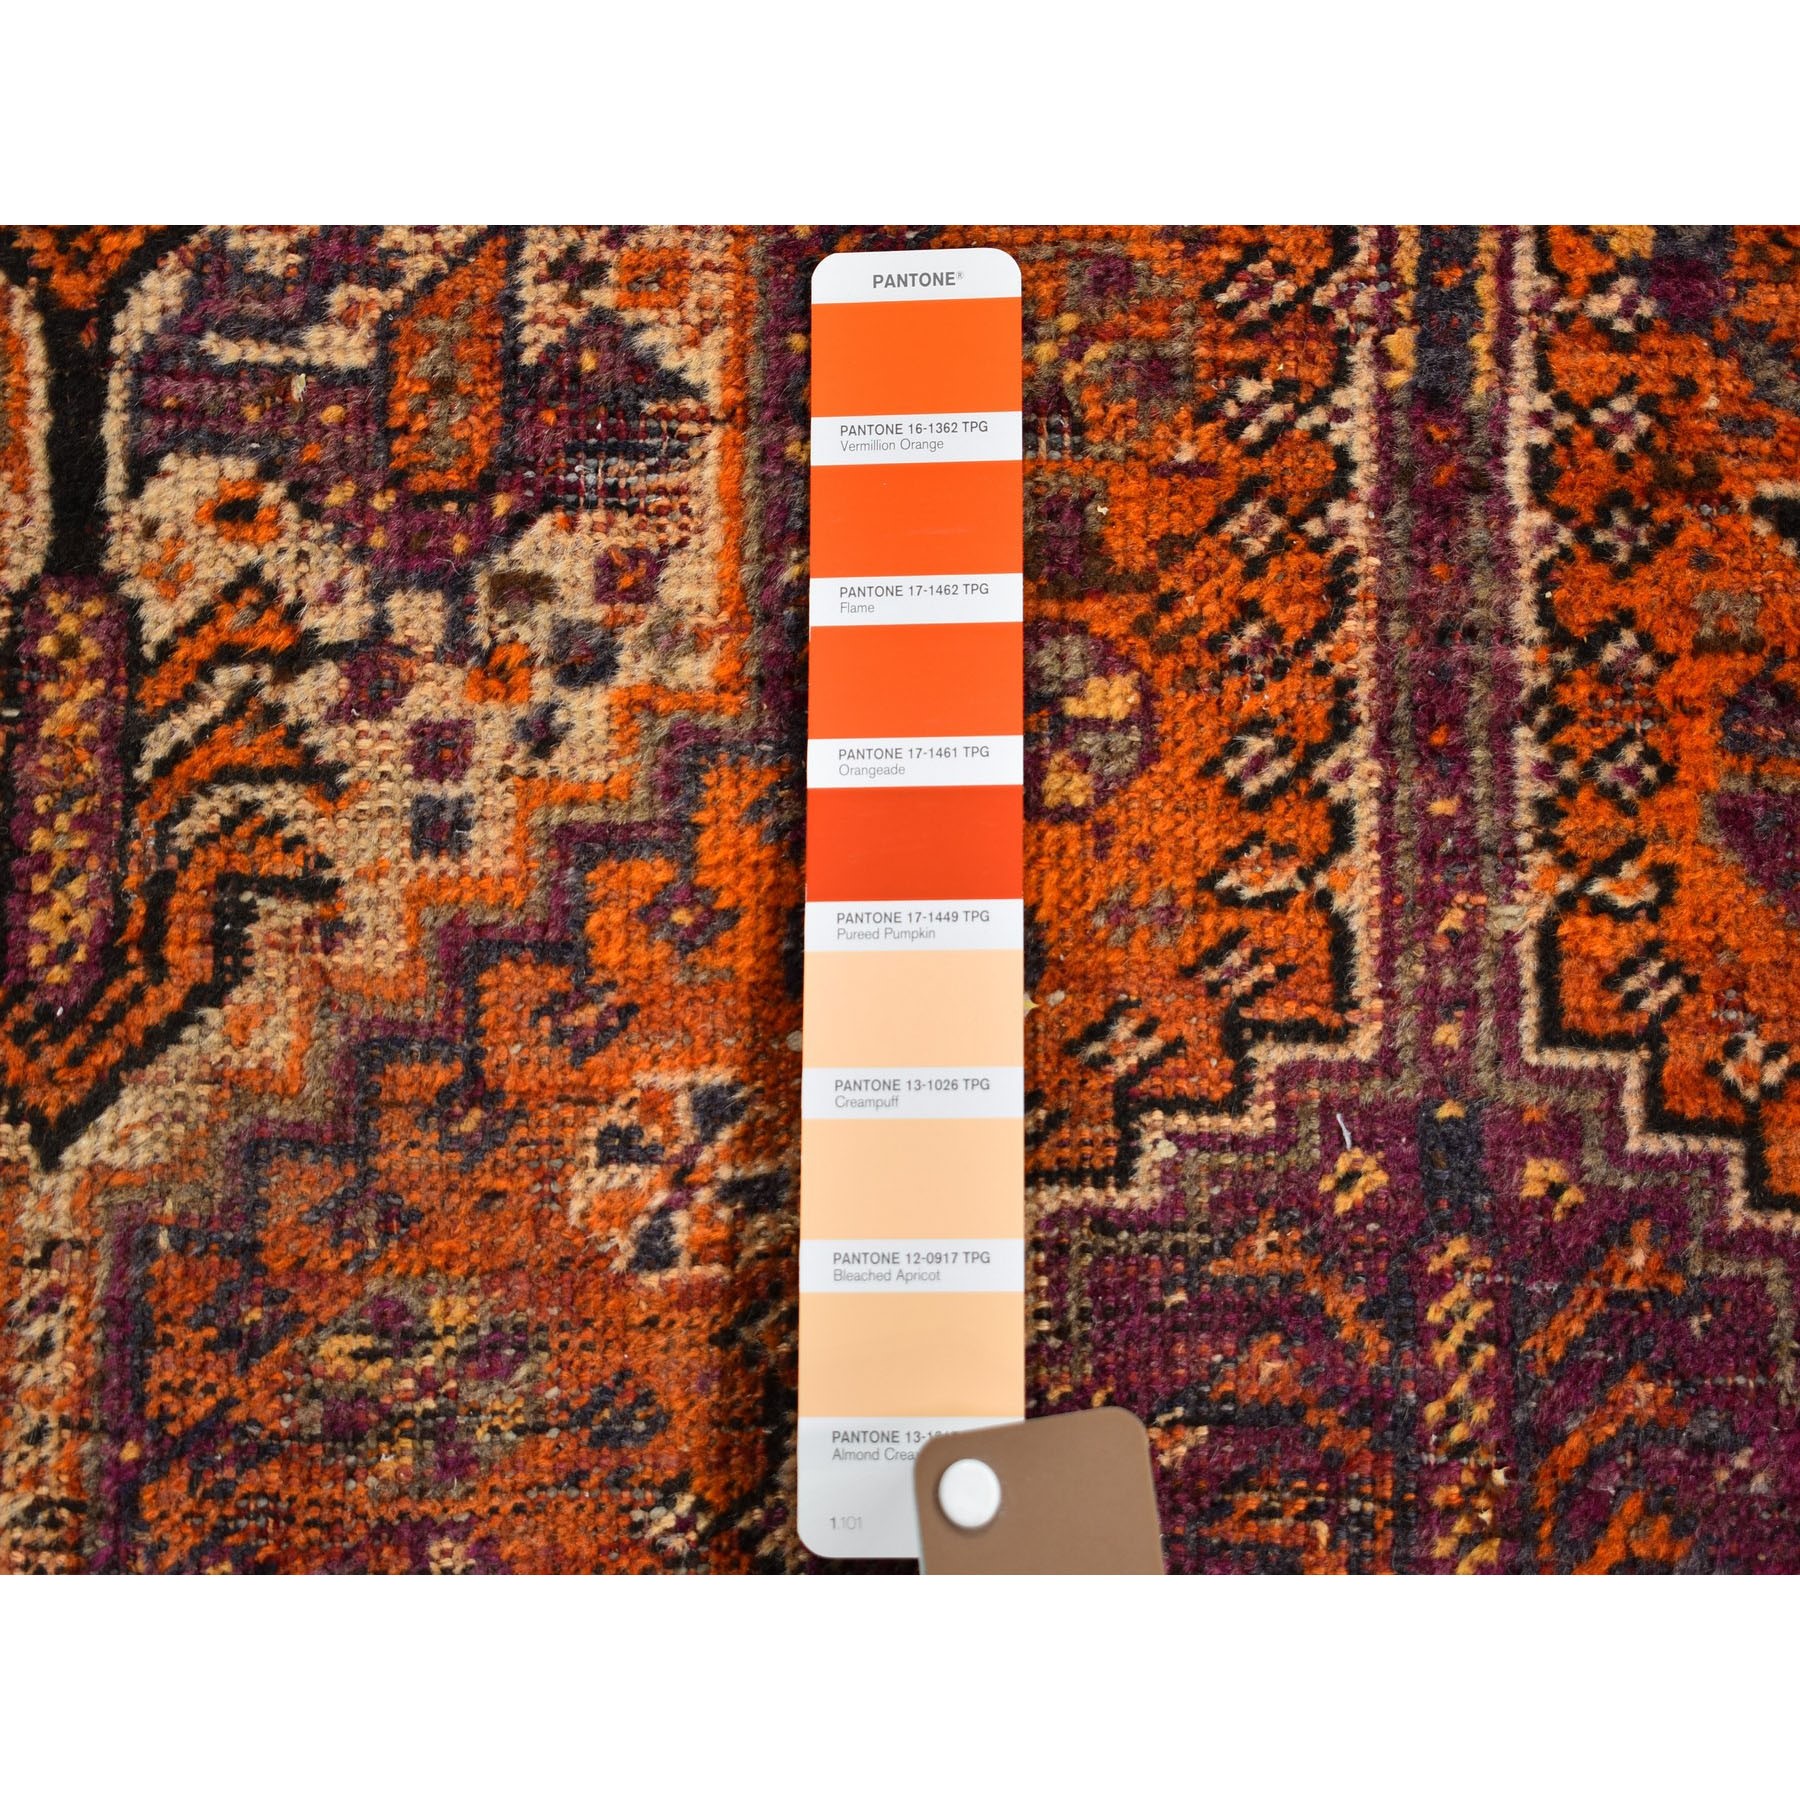 4-x9-5  Orange Gallery Size Old Persian Shiraz Worn And Repaired Hand Knotted Oriental Rug 